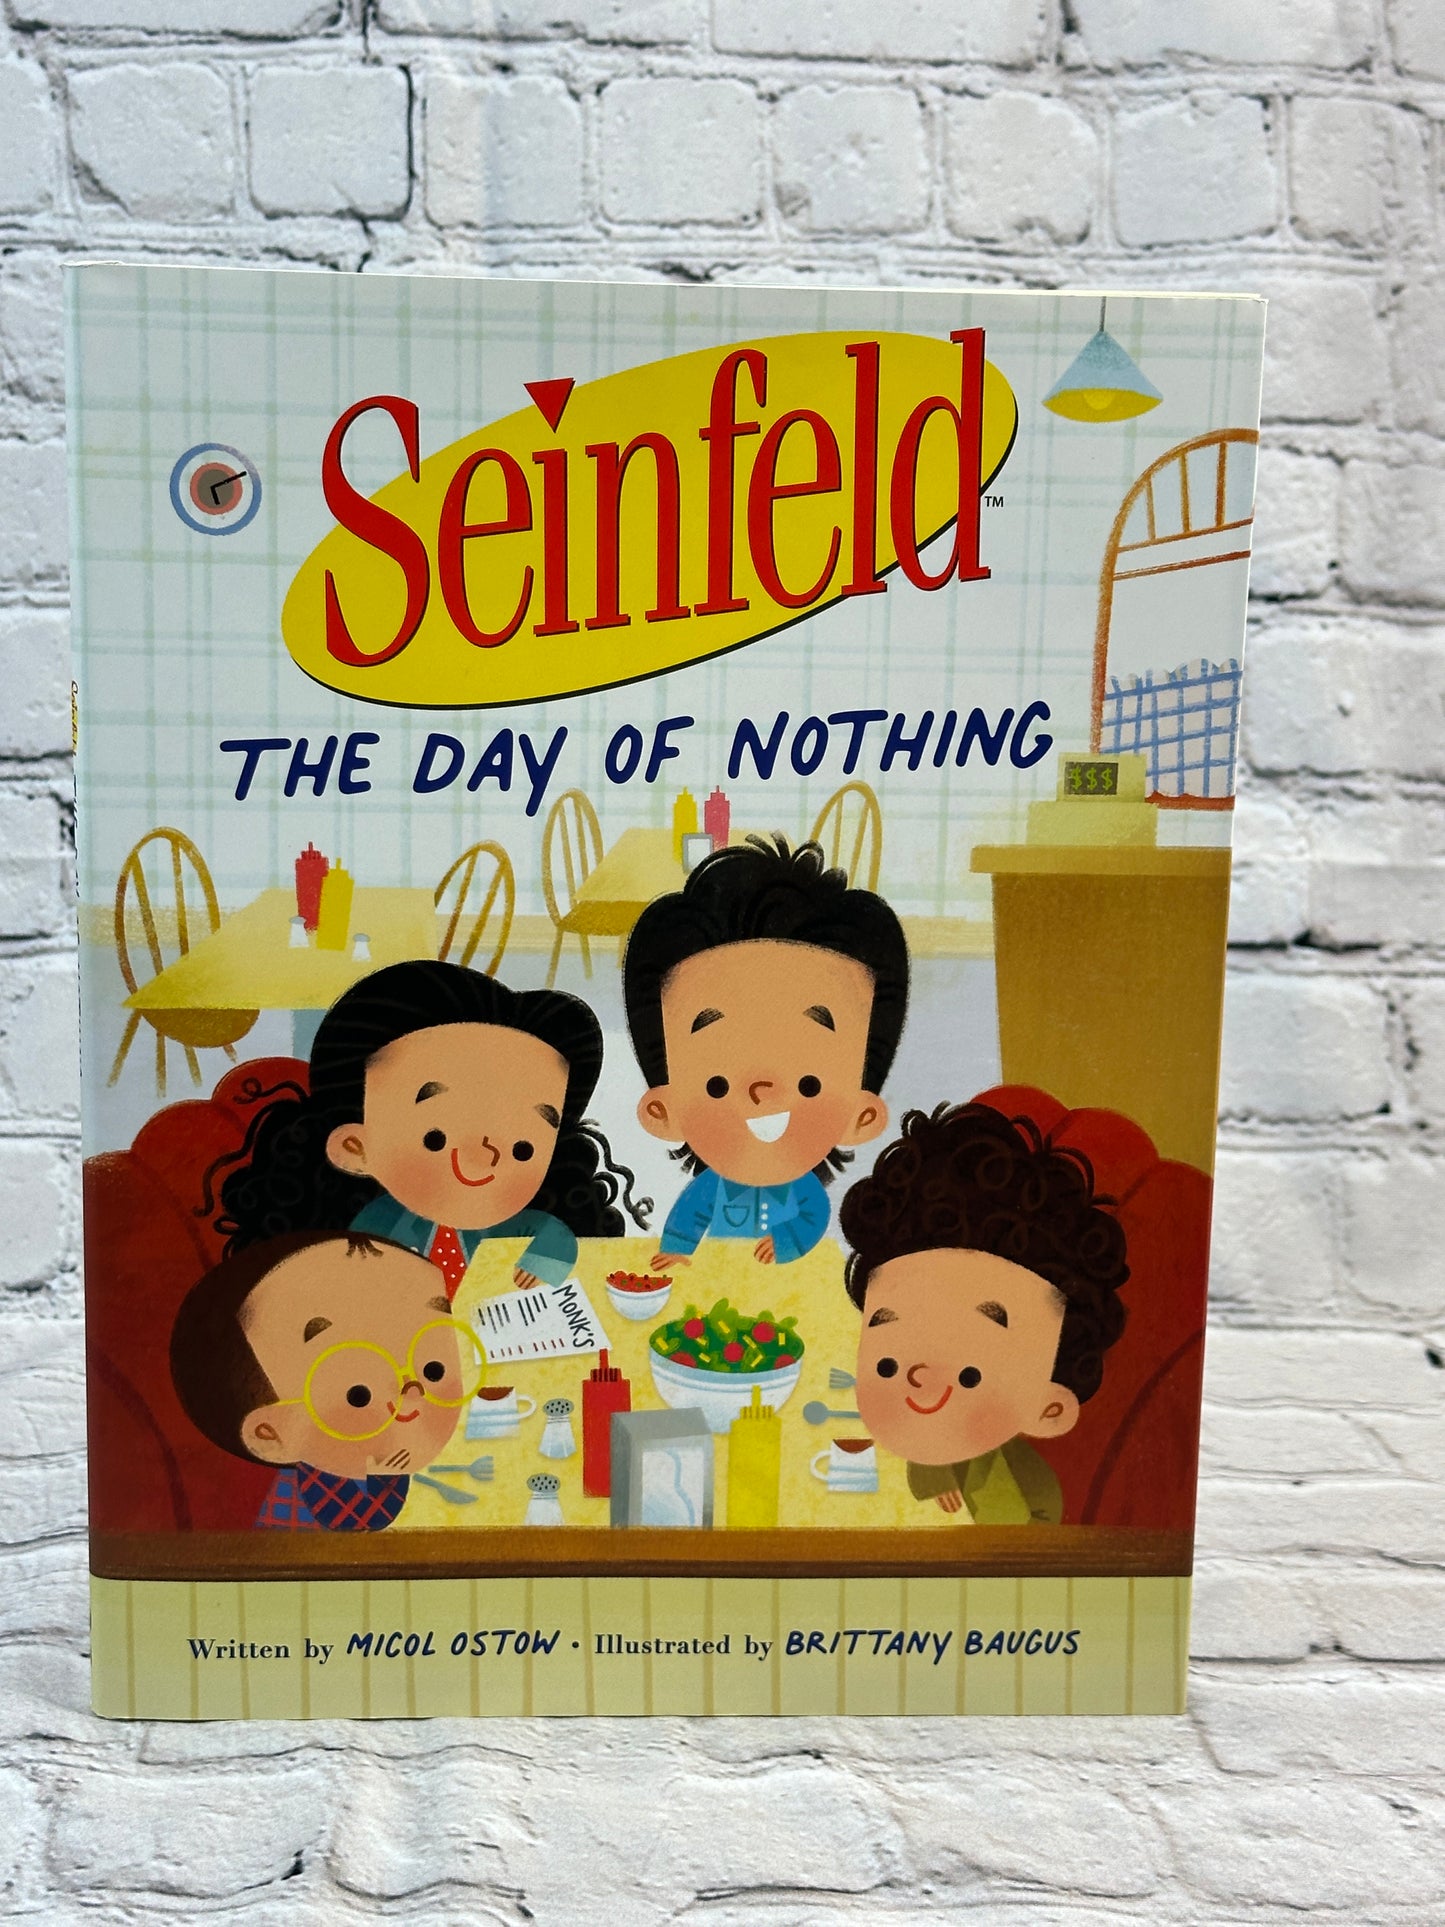 Seinfeld: The Day of Nothing by Micol Ostow and Brittany Baugus